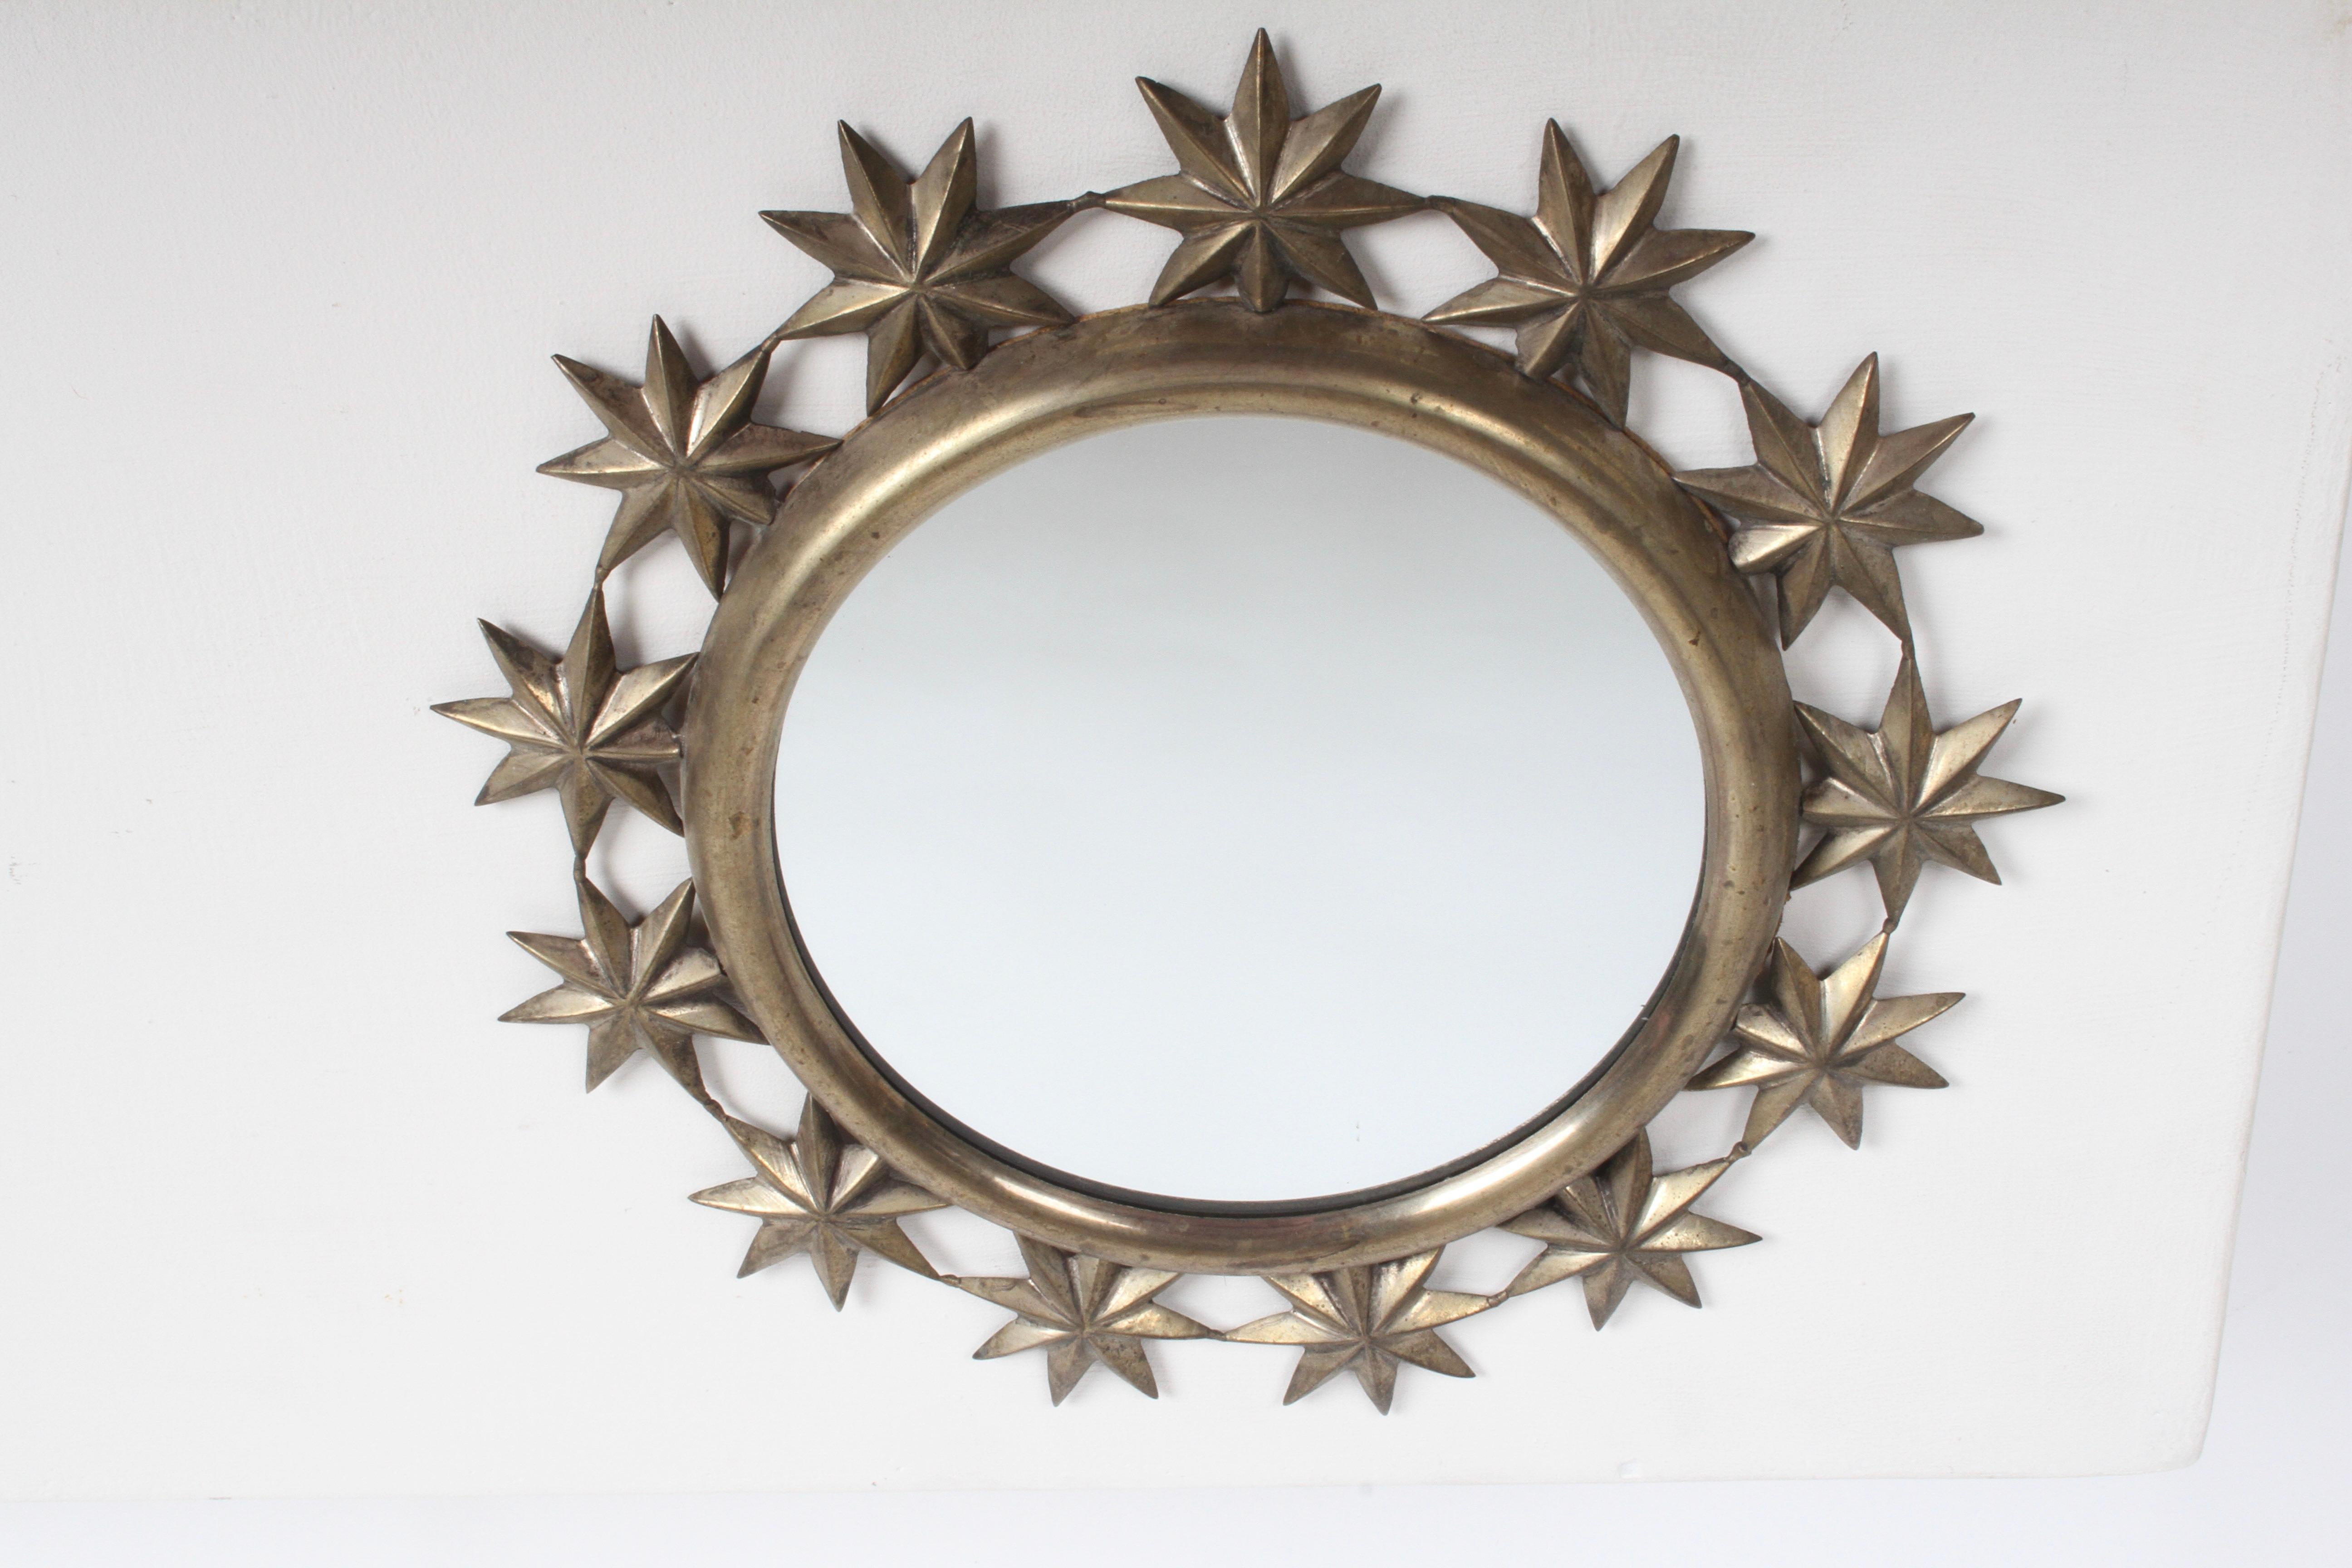 Vintage Hollywood Regency Saaried round brass mirror with 13 repousse Stars around brass frame. Brass has warm patina, light loss to mirror backing. Label on verso.